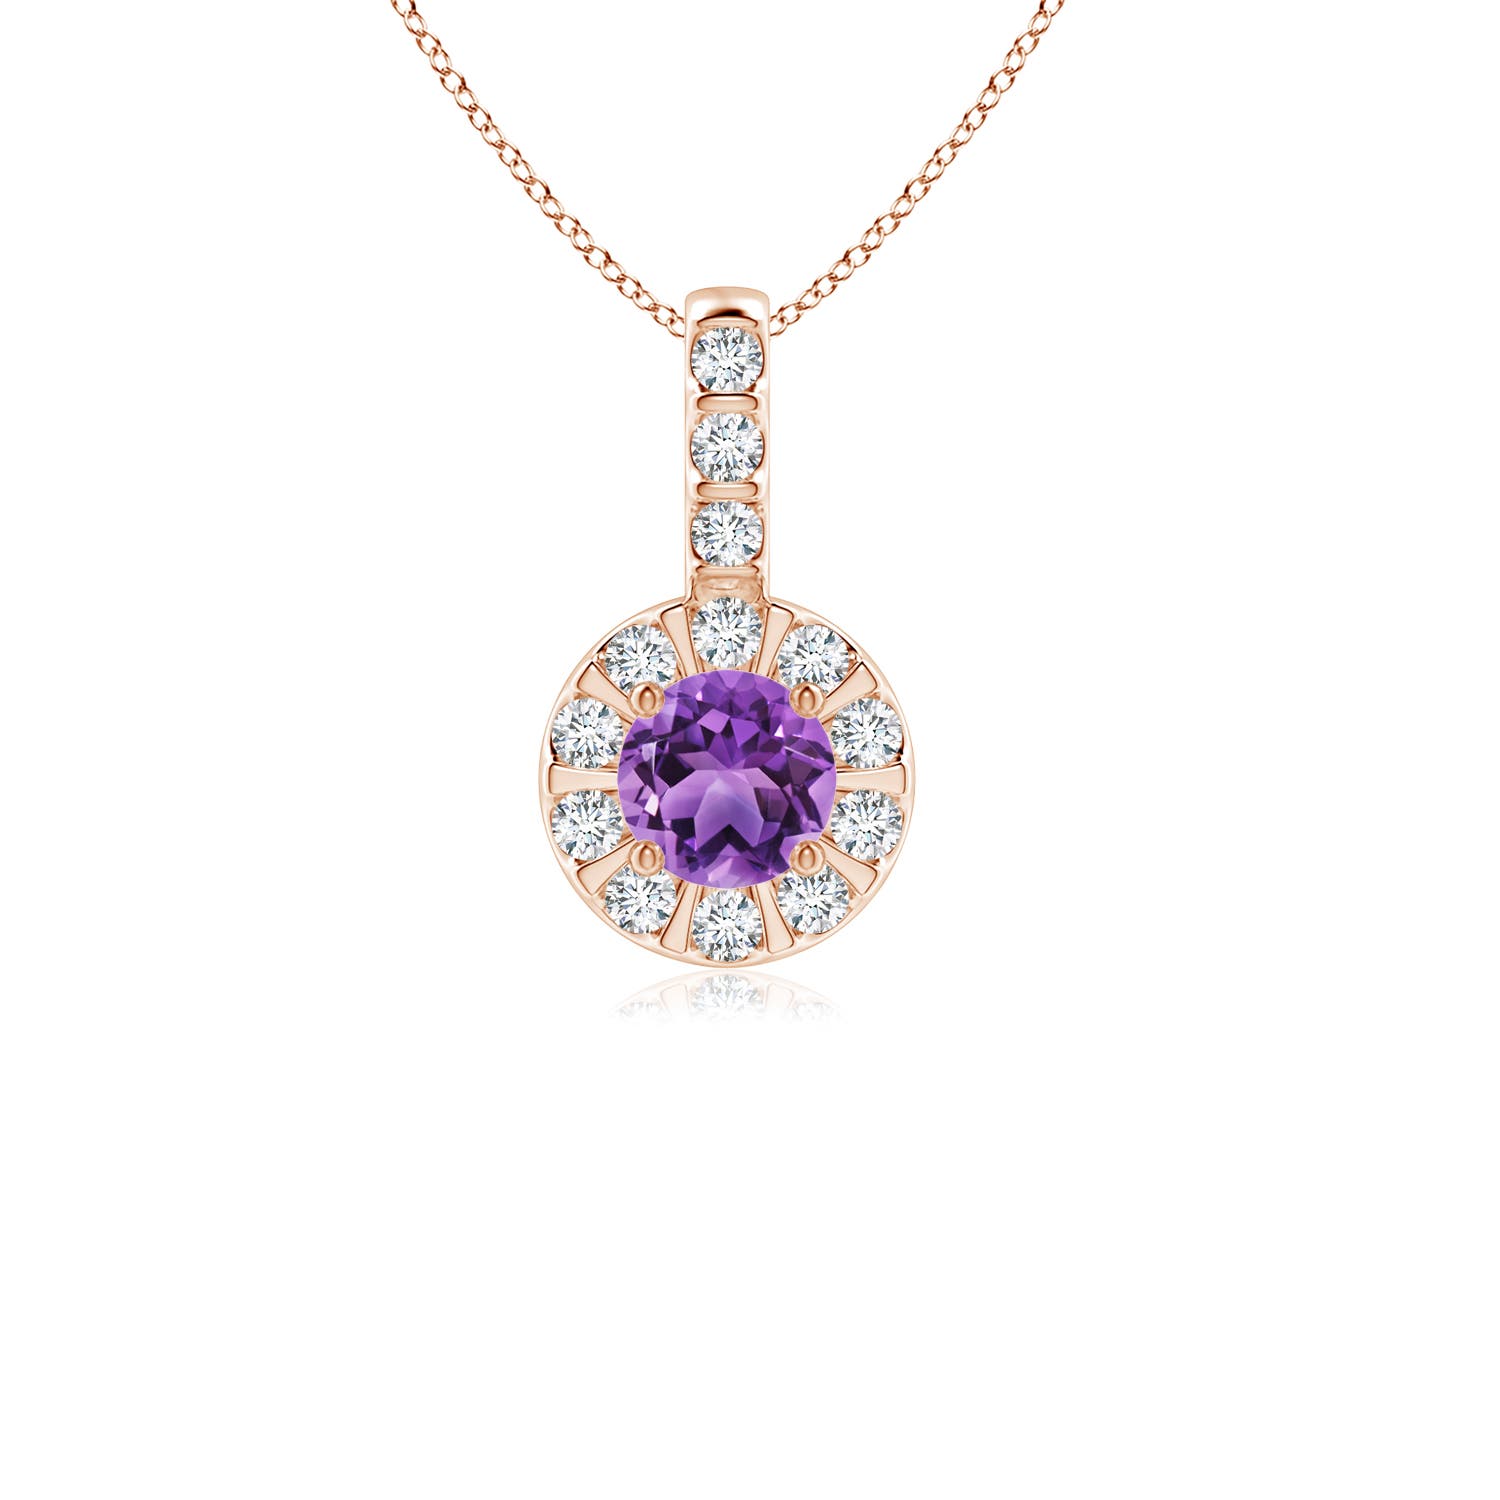 AA - Amethyst / 0.38 CT / 14 KT Rose Gold